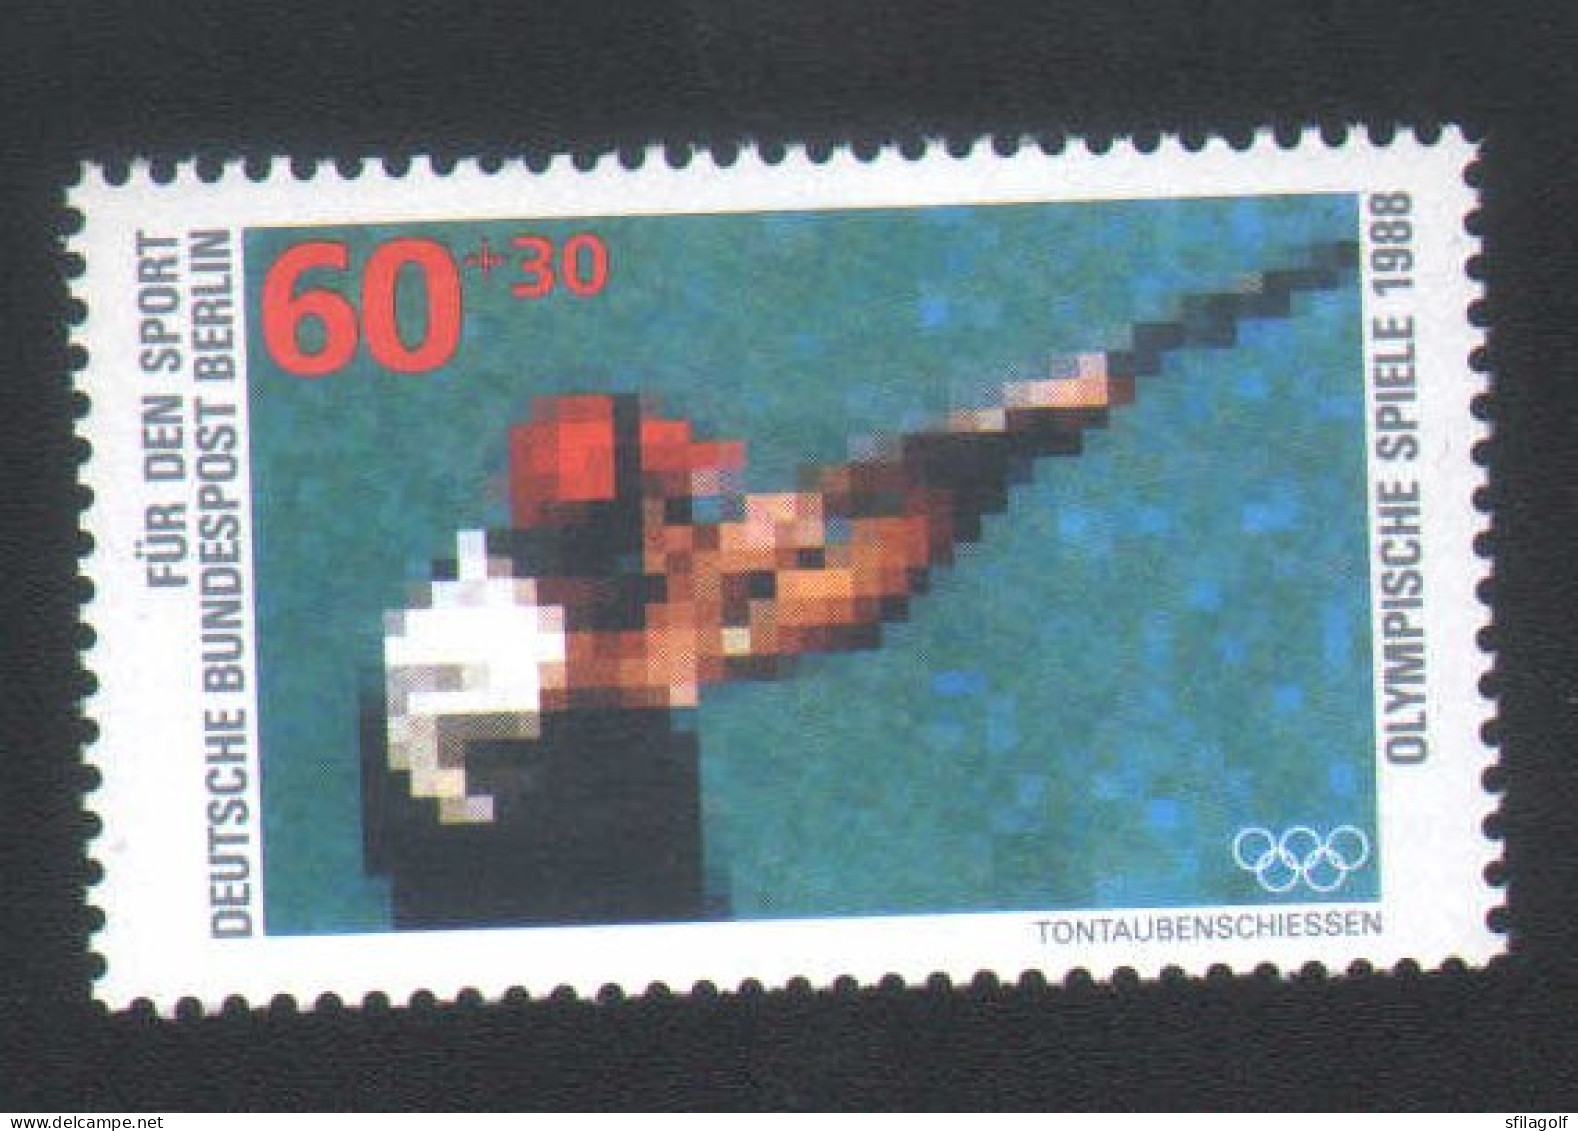 Allemagne - Germany - 1988 - Tir - Shooting - Jeux Olympiques - Olympic Games - Neuf - Mint - Tiro (armas)